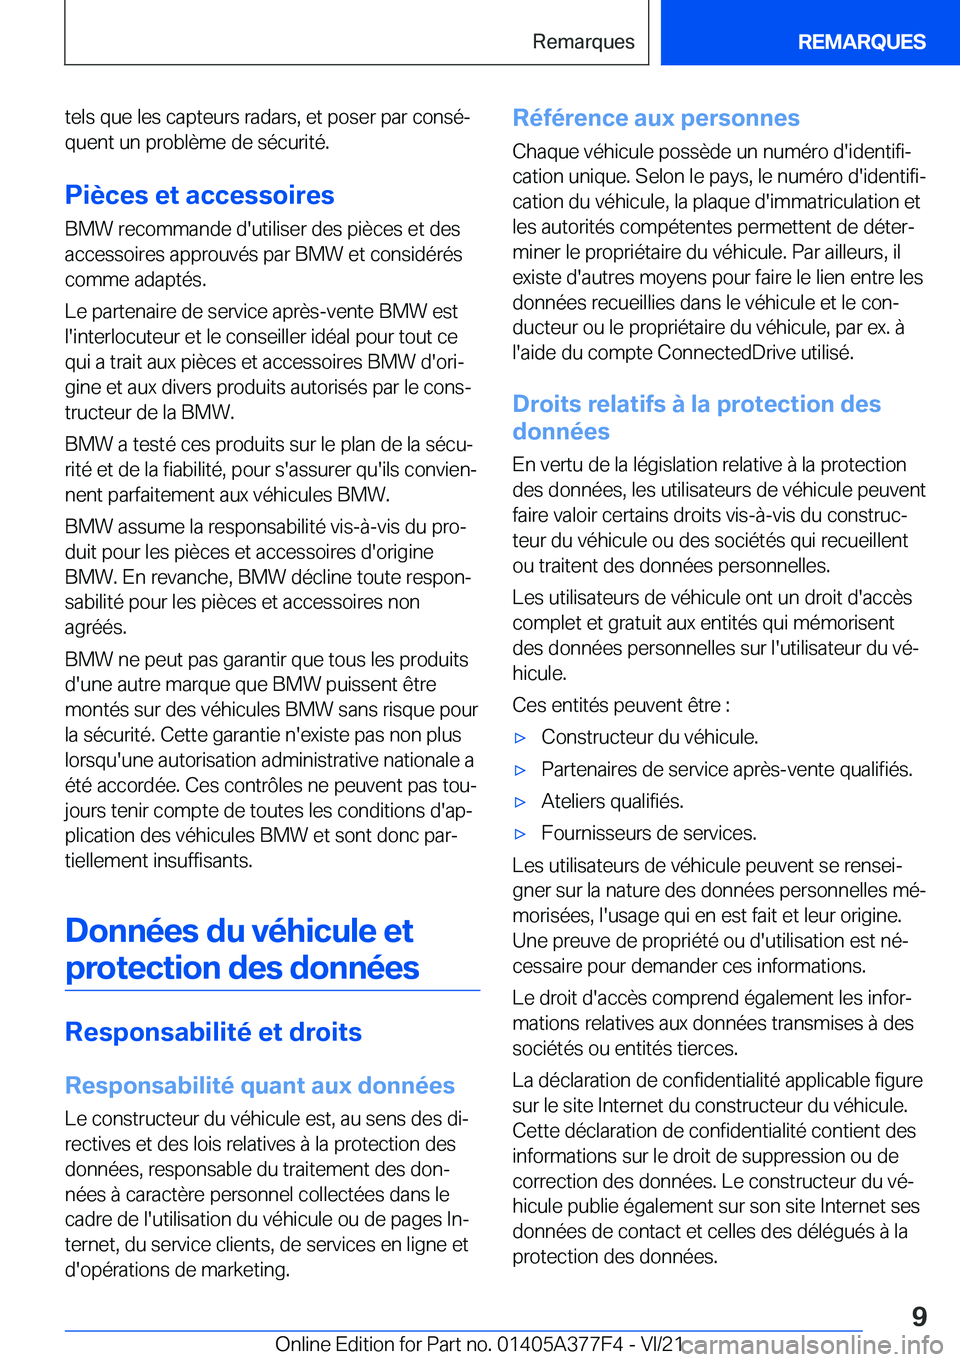 BMW X3 M 2022  Notices Demploi (in French) �t�e�l�s��q�u�e��l�e�s��c�a�p�t�e�u�r�s��r�a�d�a�r�s�,��e�t��p�o�s�e�r��p�a�r��c�o�n�s�éj�q�u�e�n�t��u�n��p�r�o�b�l�è�m�e��d�e��s�é�c�u�r�i�t�é�.
�P�i�è�c�e�s��e�t��a�c�c�e�s�s�o�i